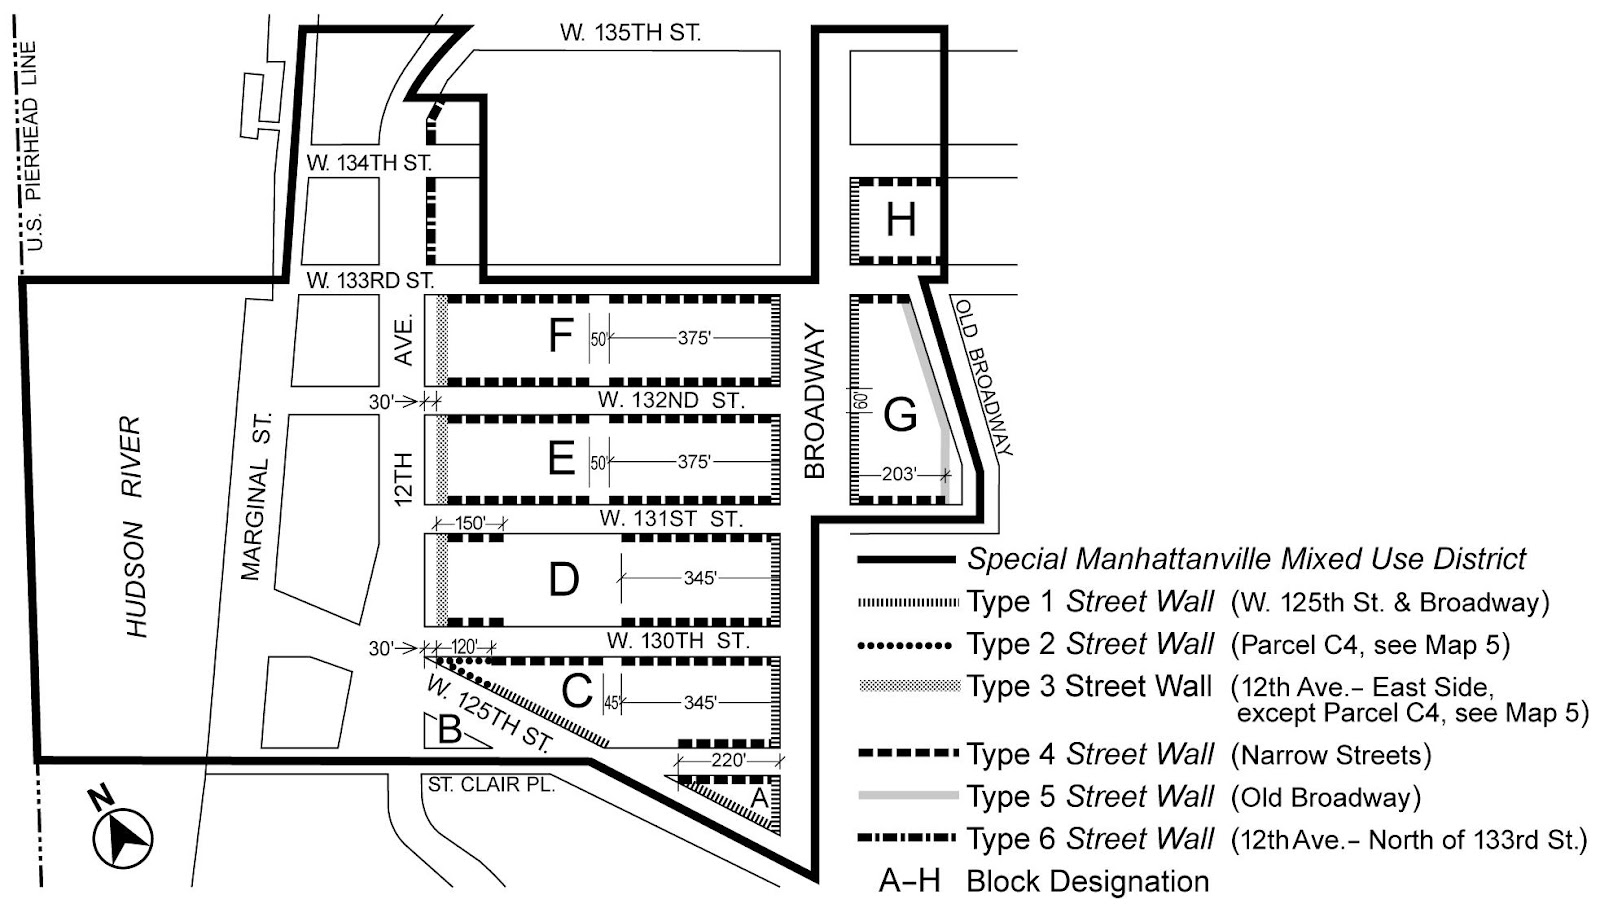 Zoning Resolutions Chapter 4: Special Manhattanville Mixed Use District Appendix A.3